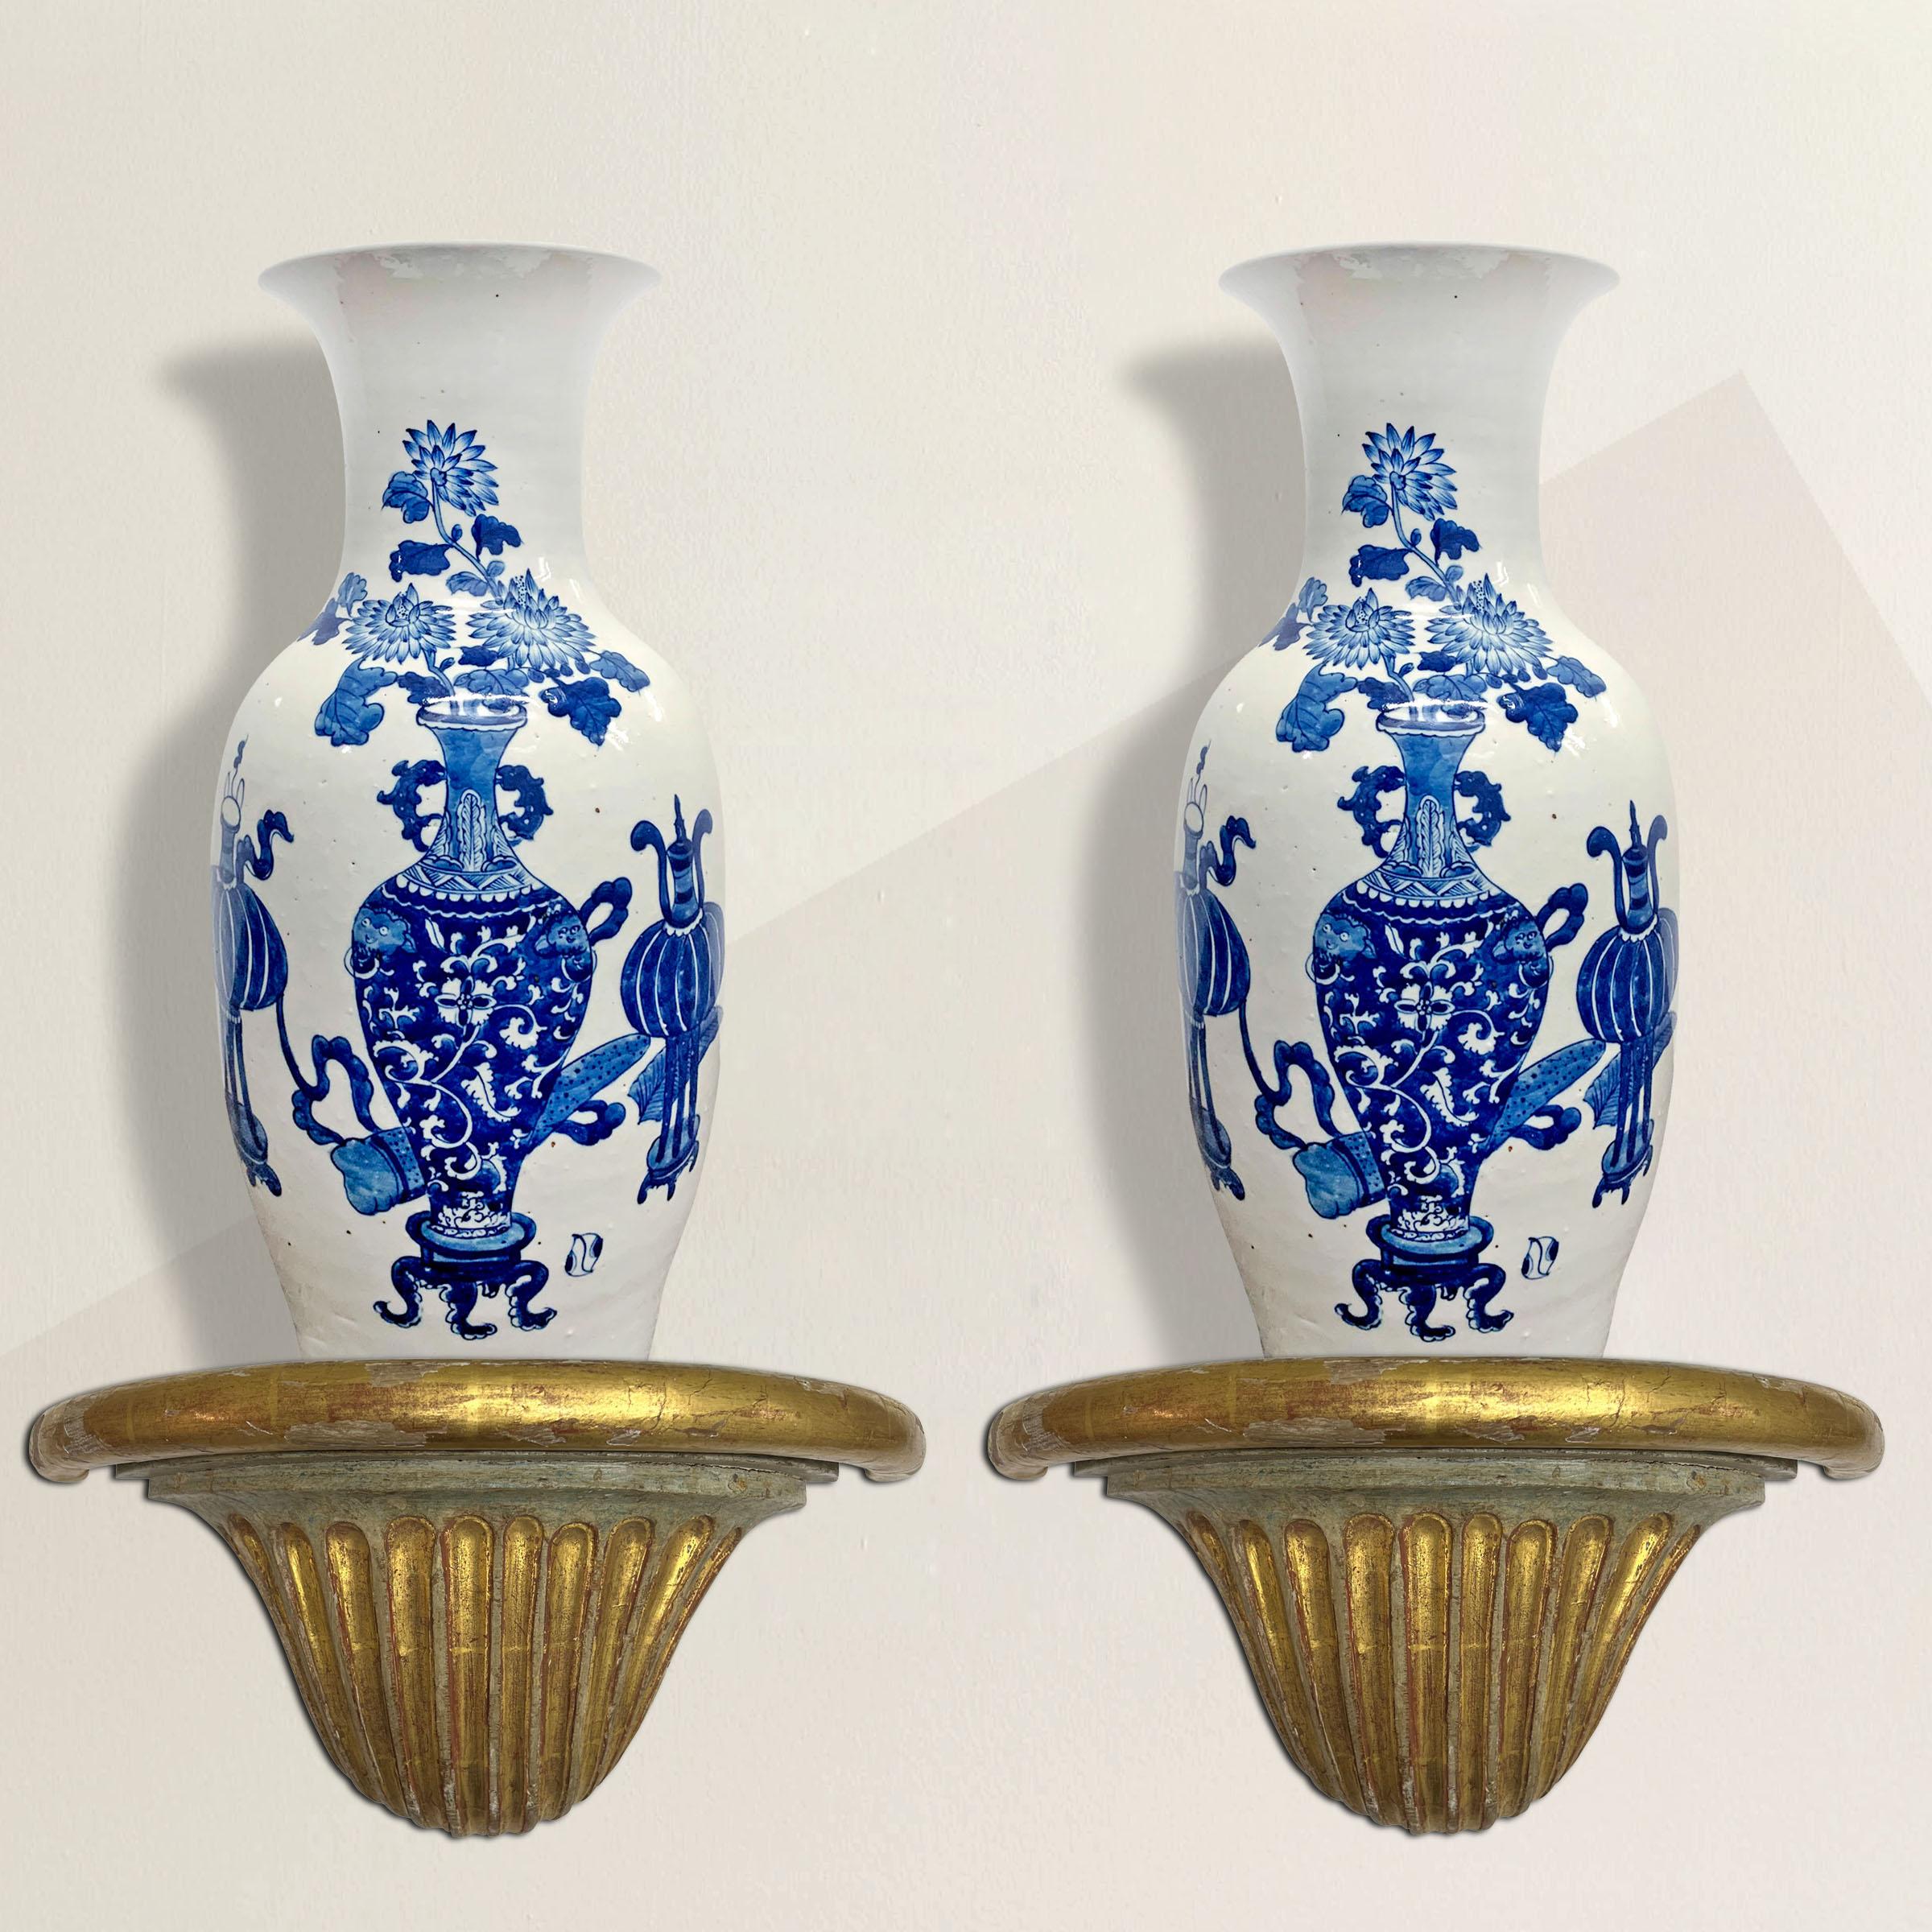 An exquisite pair of 18th century French Louis XVI wall brackets with water-gilt highlights, fluted bases that resemble shells, and faux-marble painted tops. Perfect for flanking a mirror in your entry and displaying your favorite pair of urns or